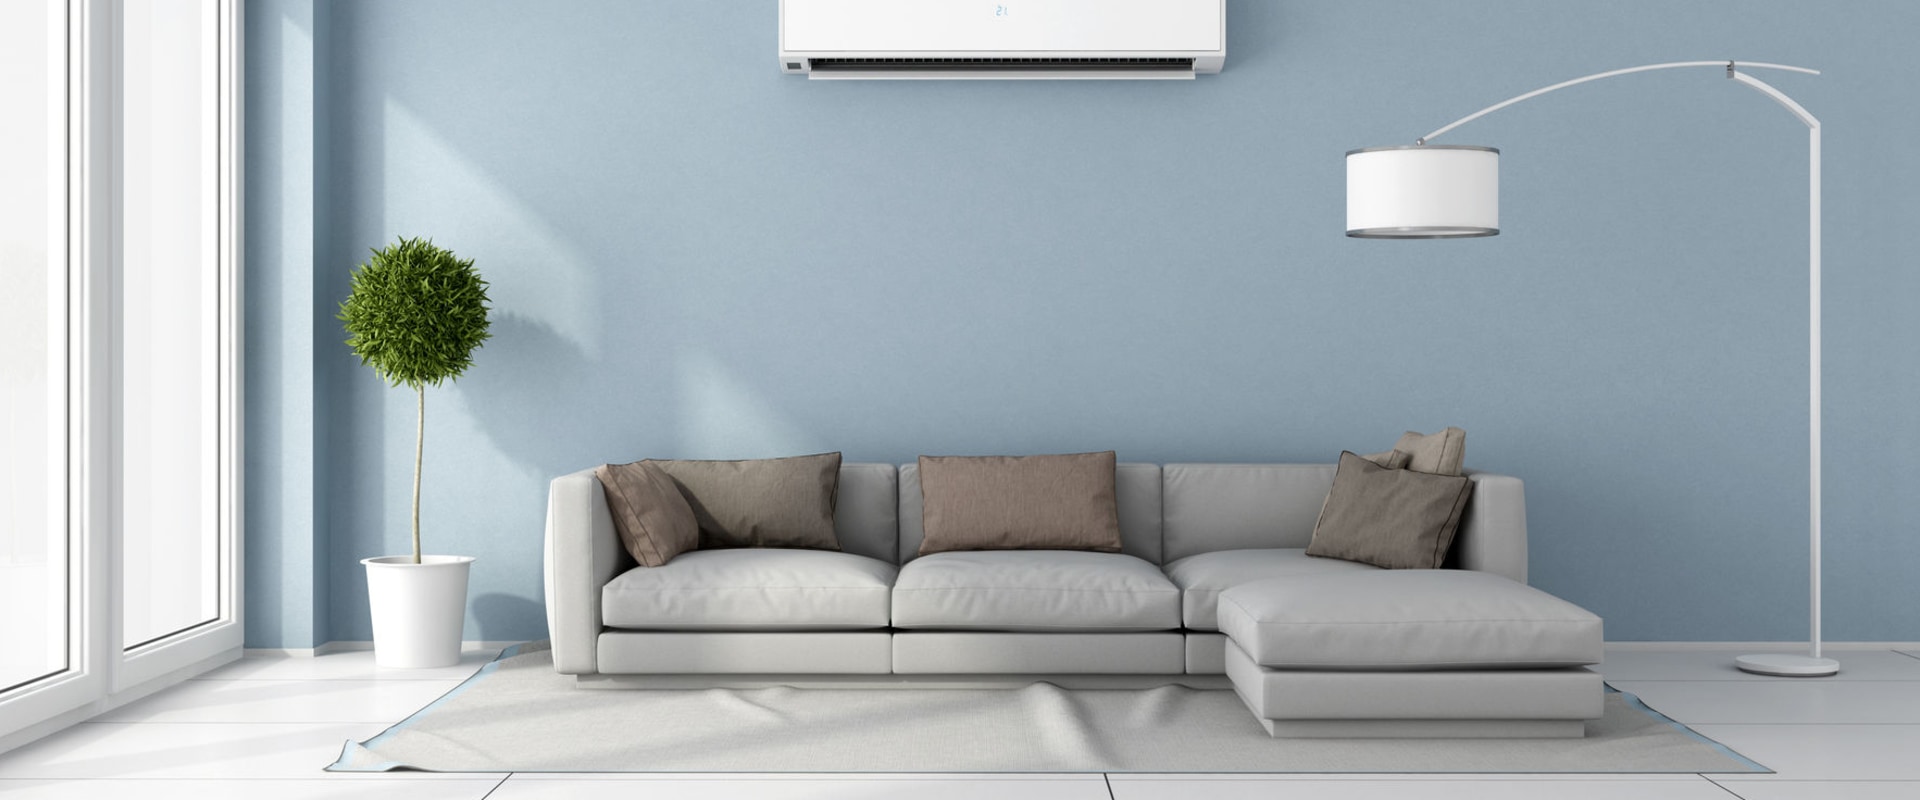 Why are ductless air conditioners so expensive?